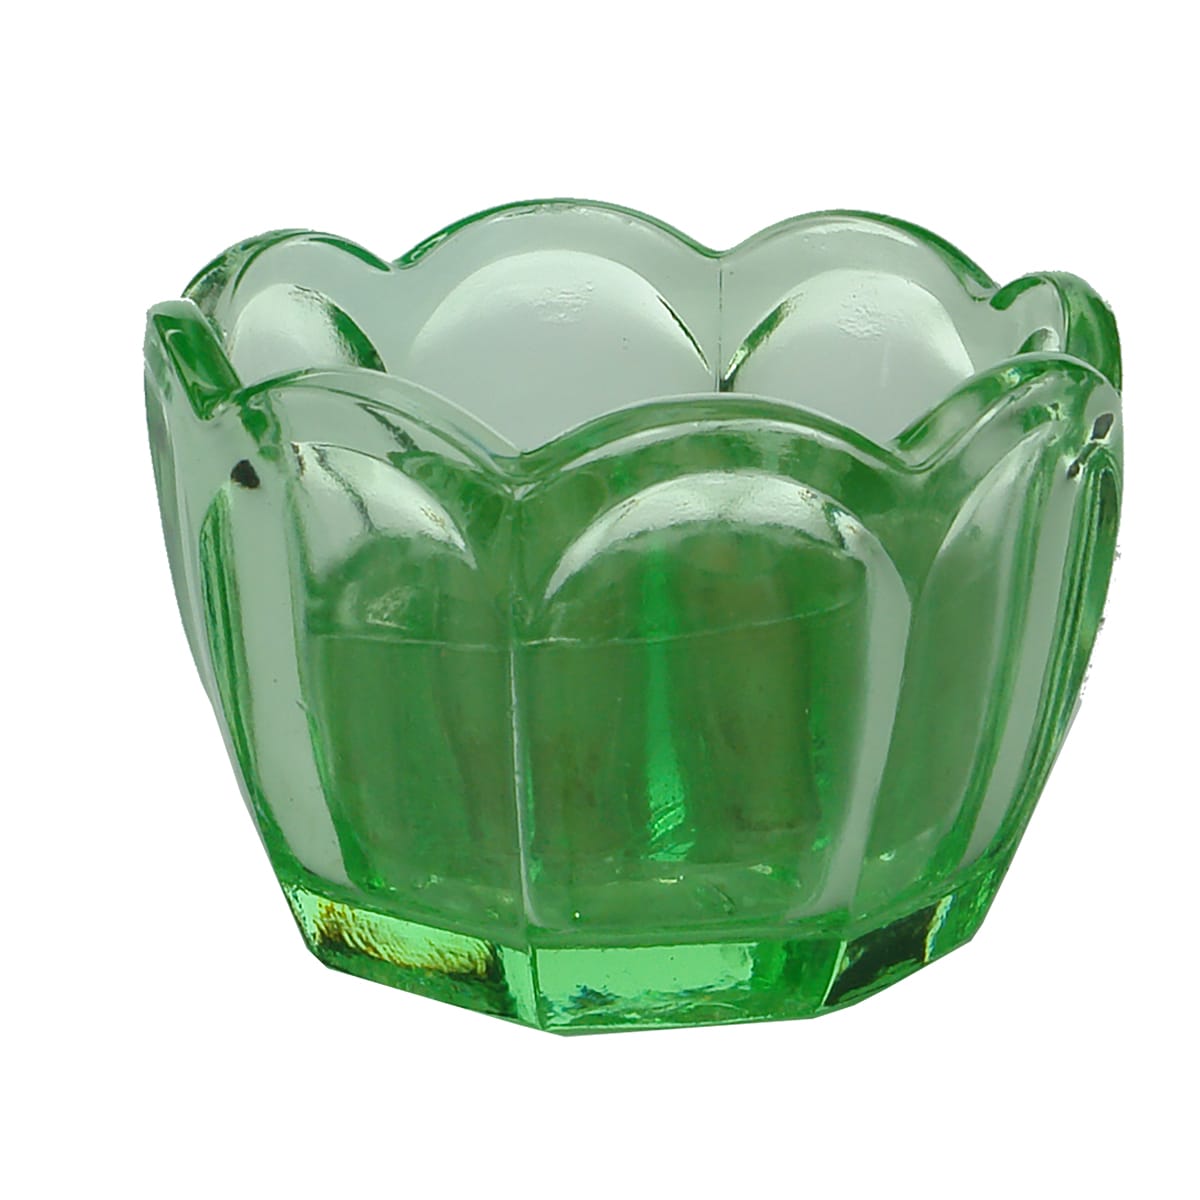 Glassware. Small green depression glass bowl with frog.